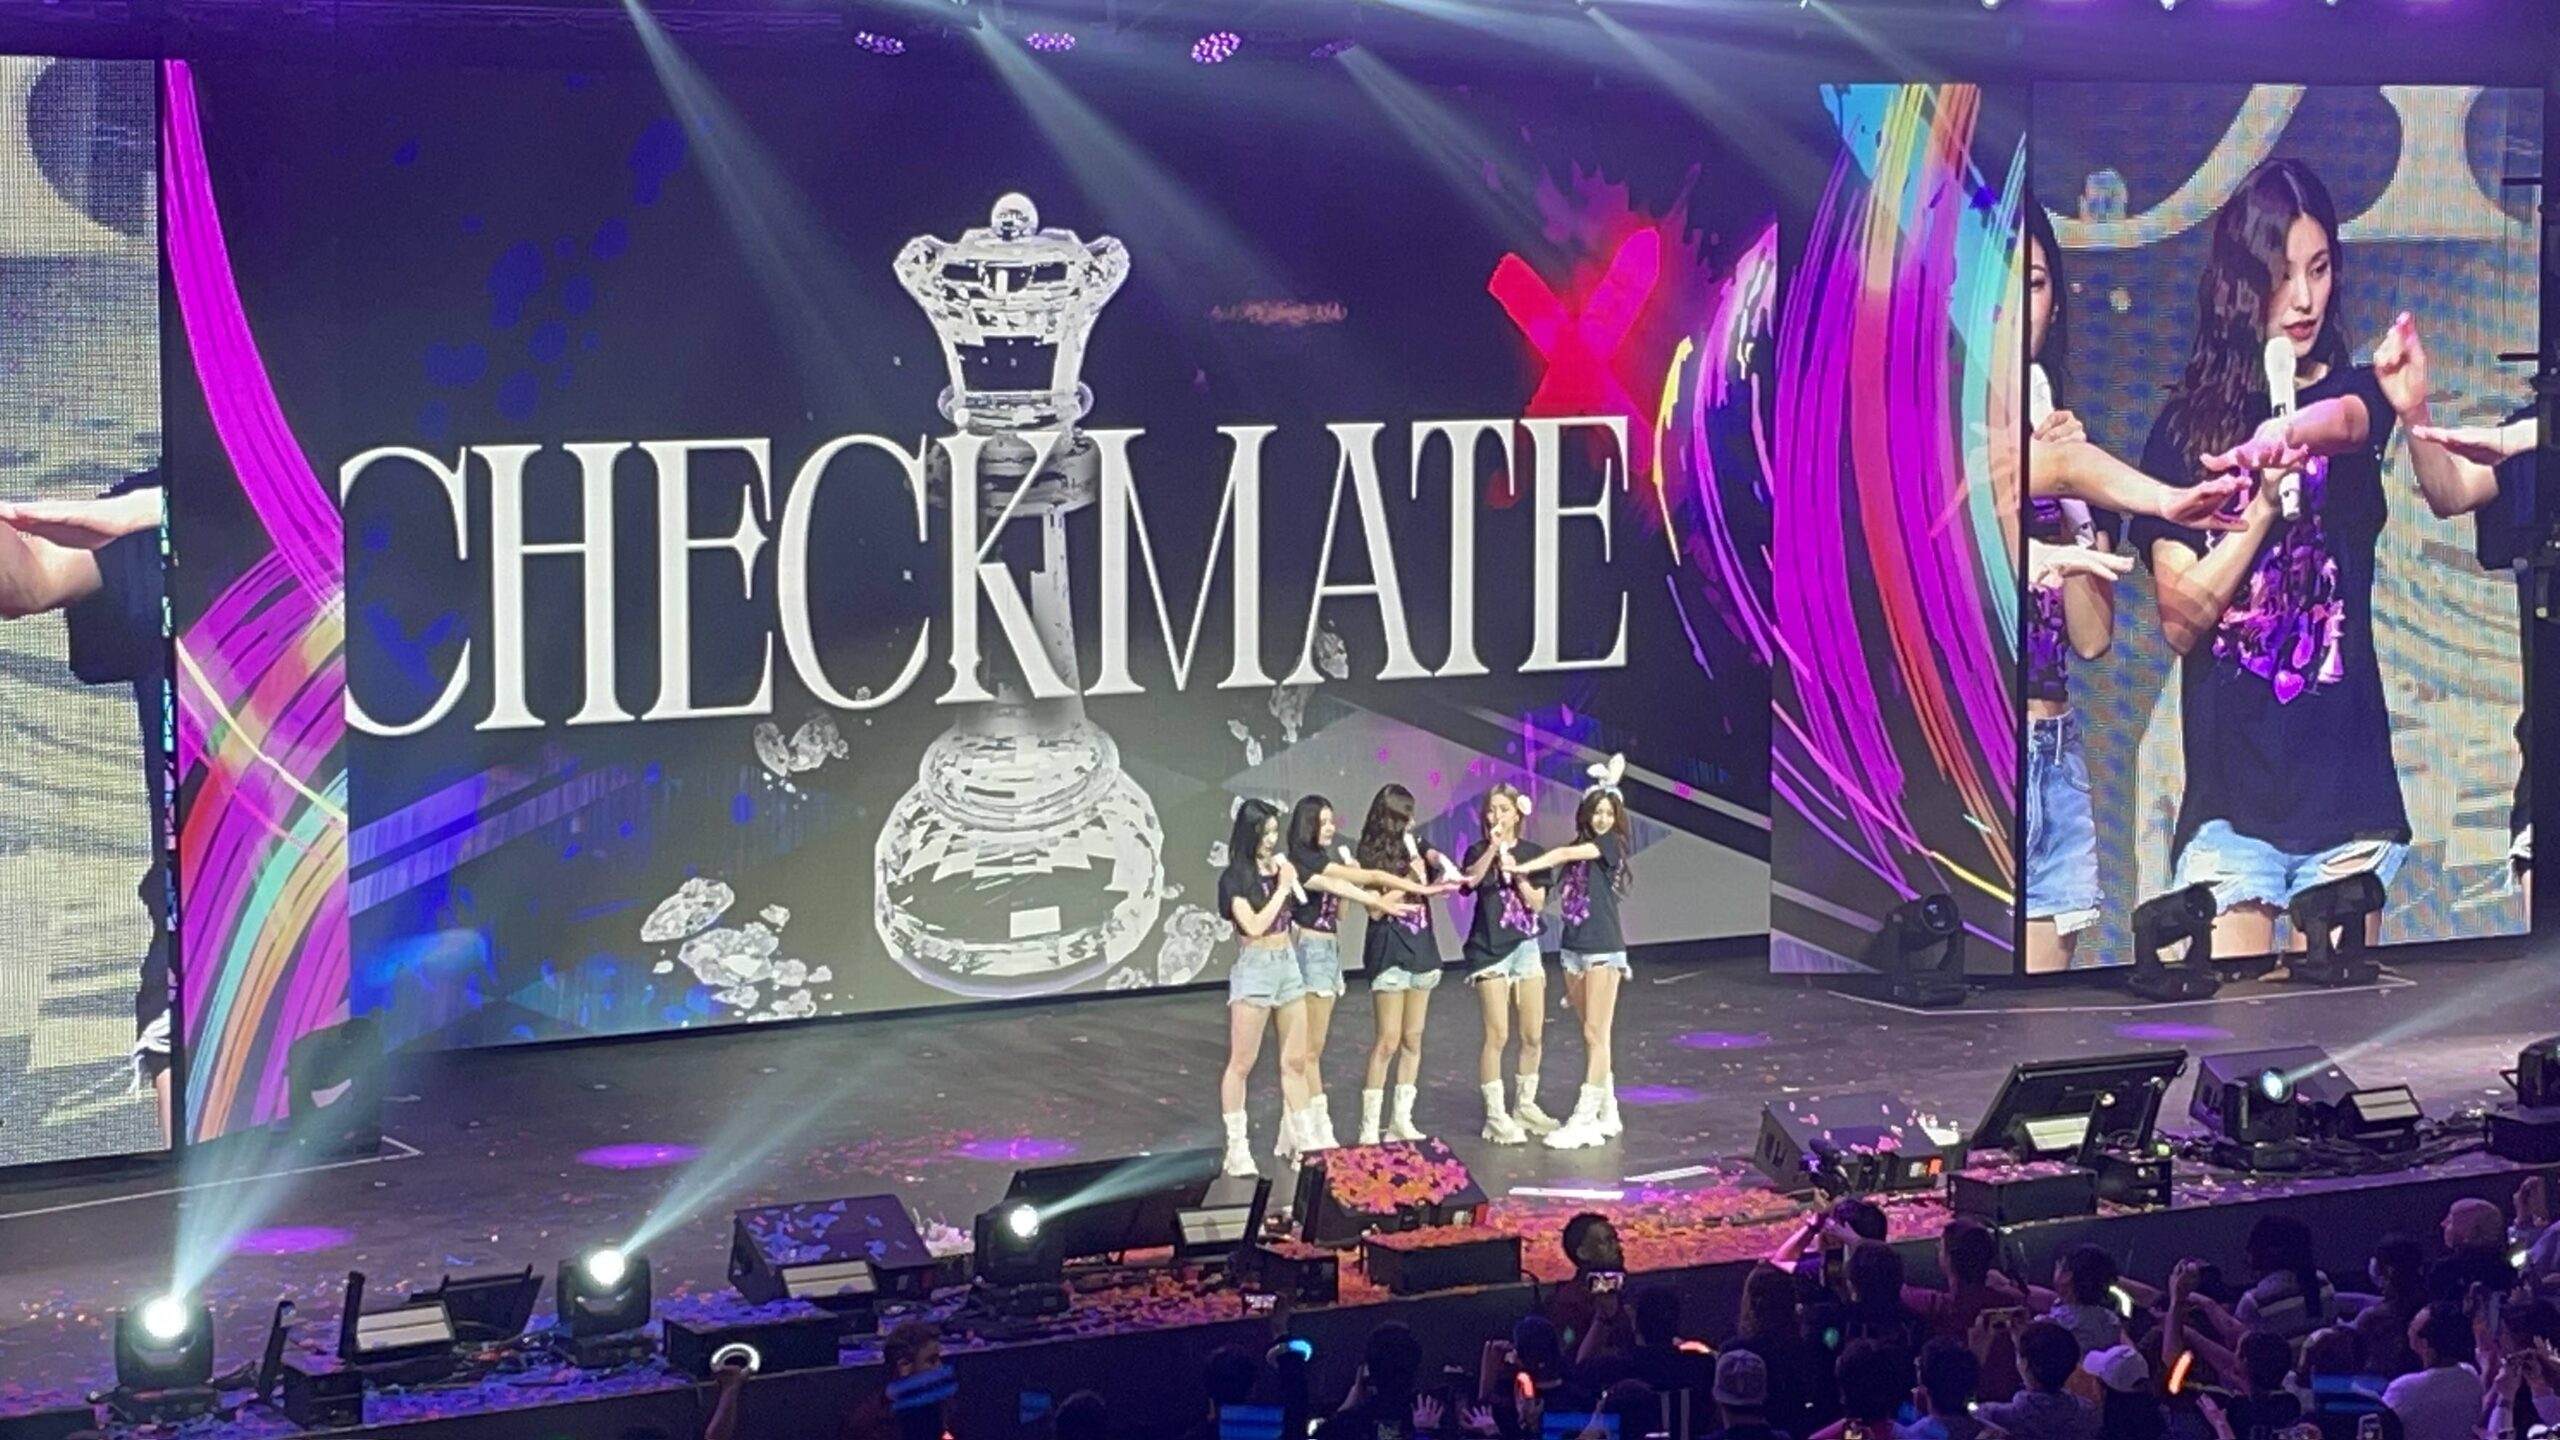 ITZY Wraps North American Leg of 'Checkmate World Tour' in NYC: Photo  4857194, ITZY, K-Pop, Music Photos